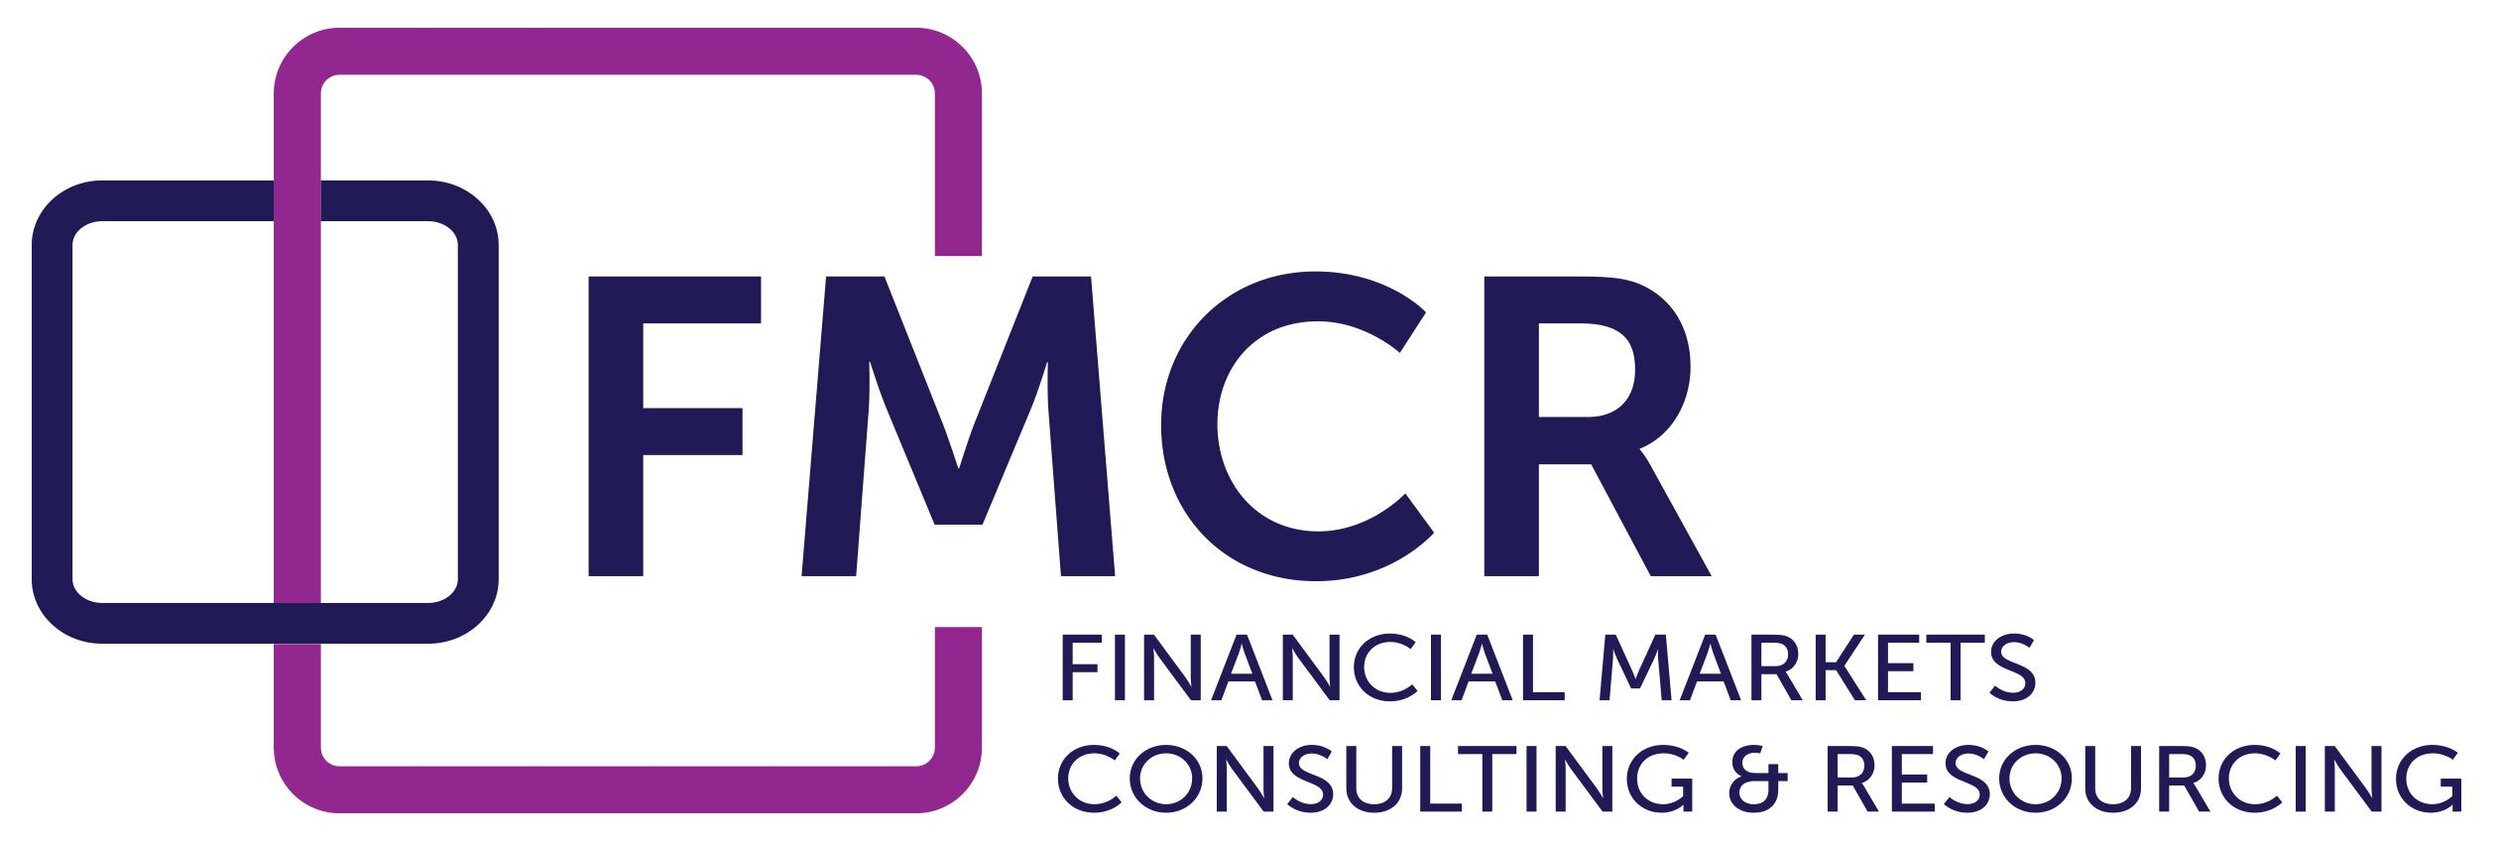 FMCR - Financial Markets Consulting &amp; Resourcing